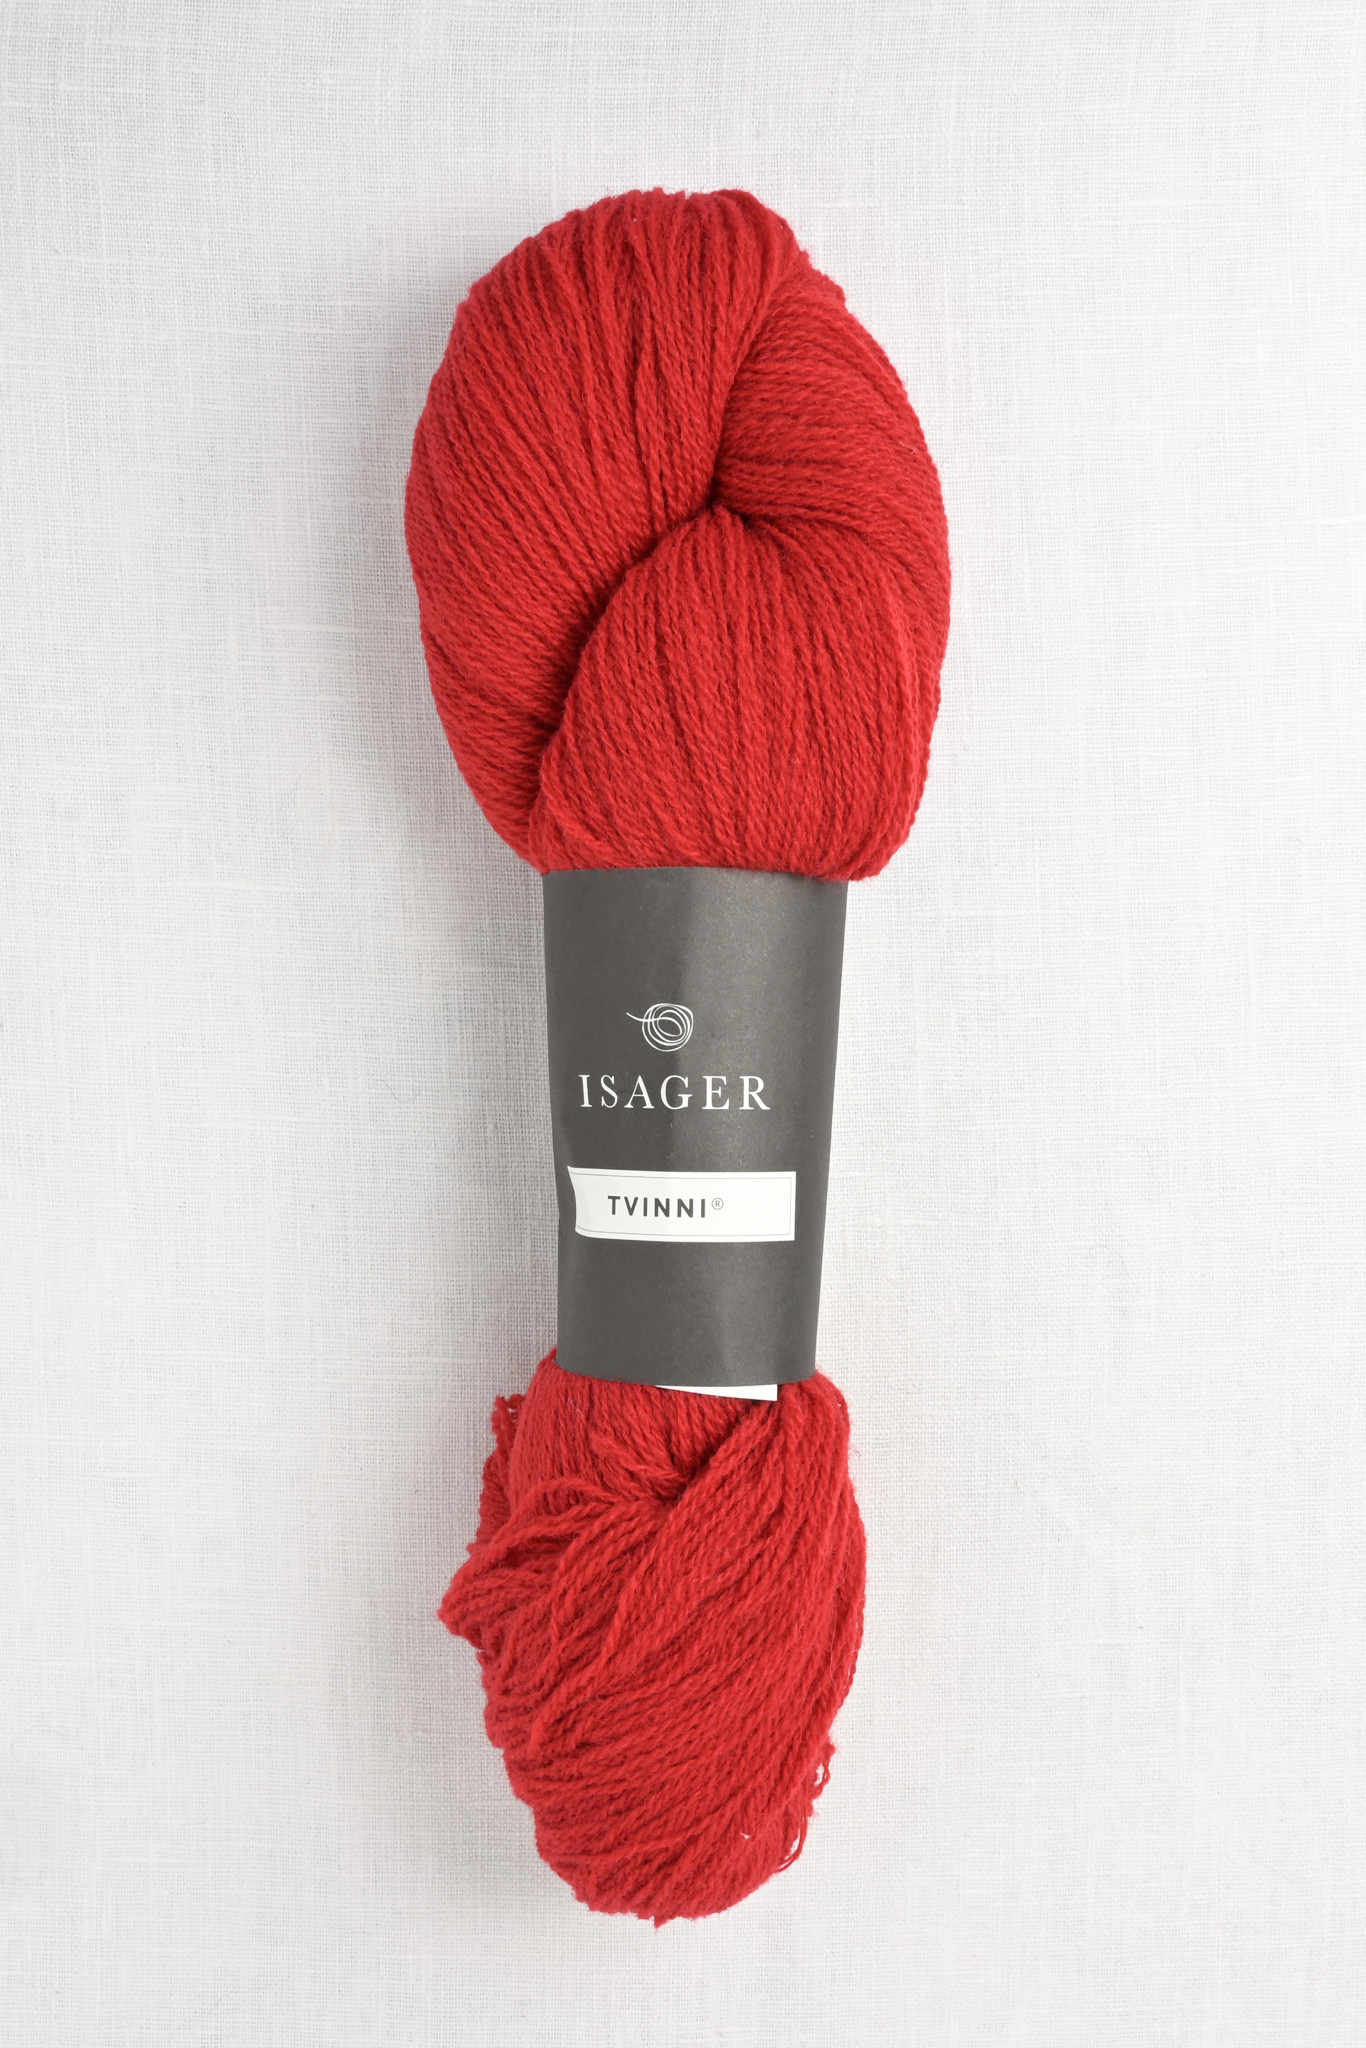 Profit overvældende Ewell Isager Tvinni 32 Red - Wool and Company Fine Yarn